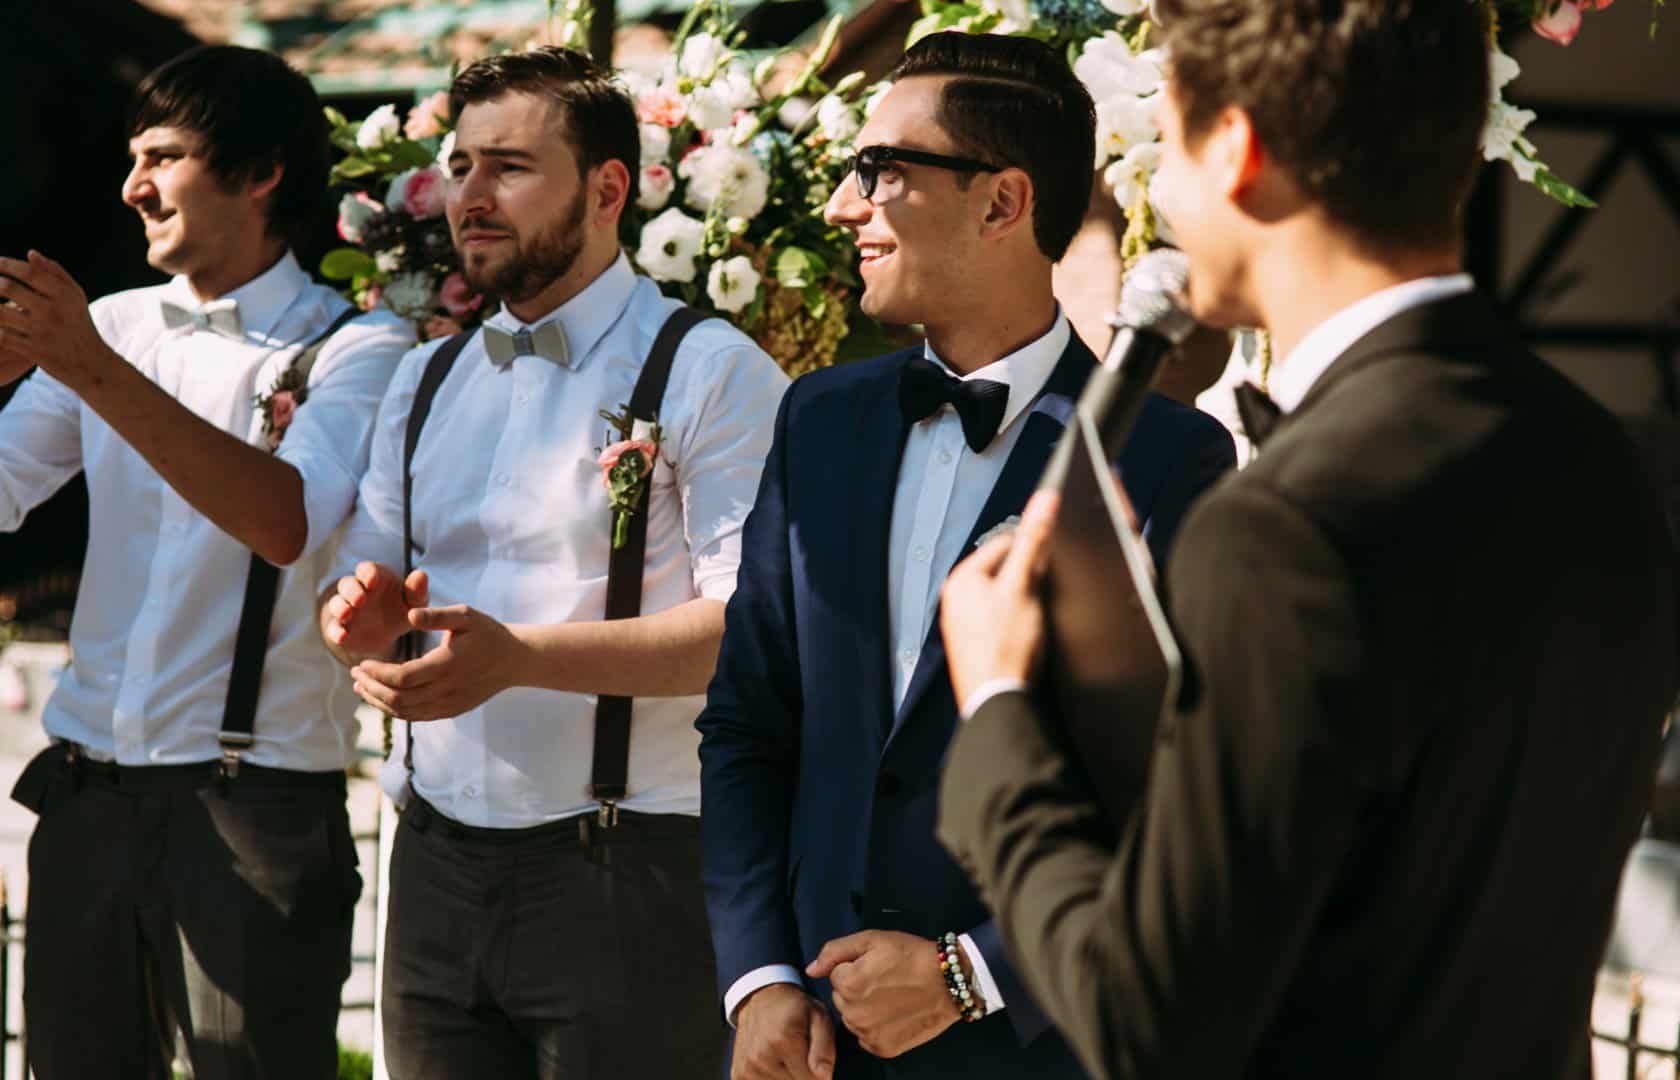 Best Man Duties: Don't Steal Bride! Do These Things Instead 115